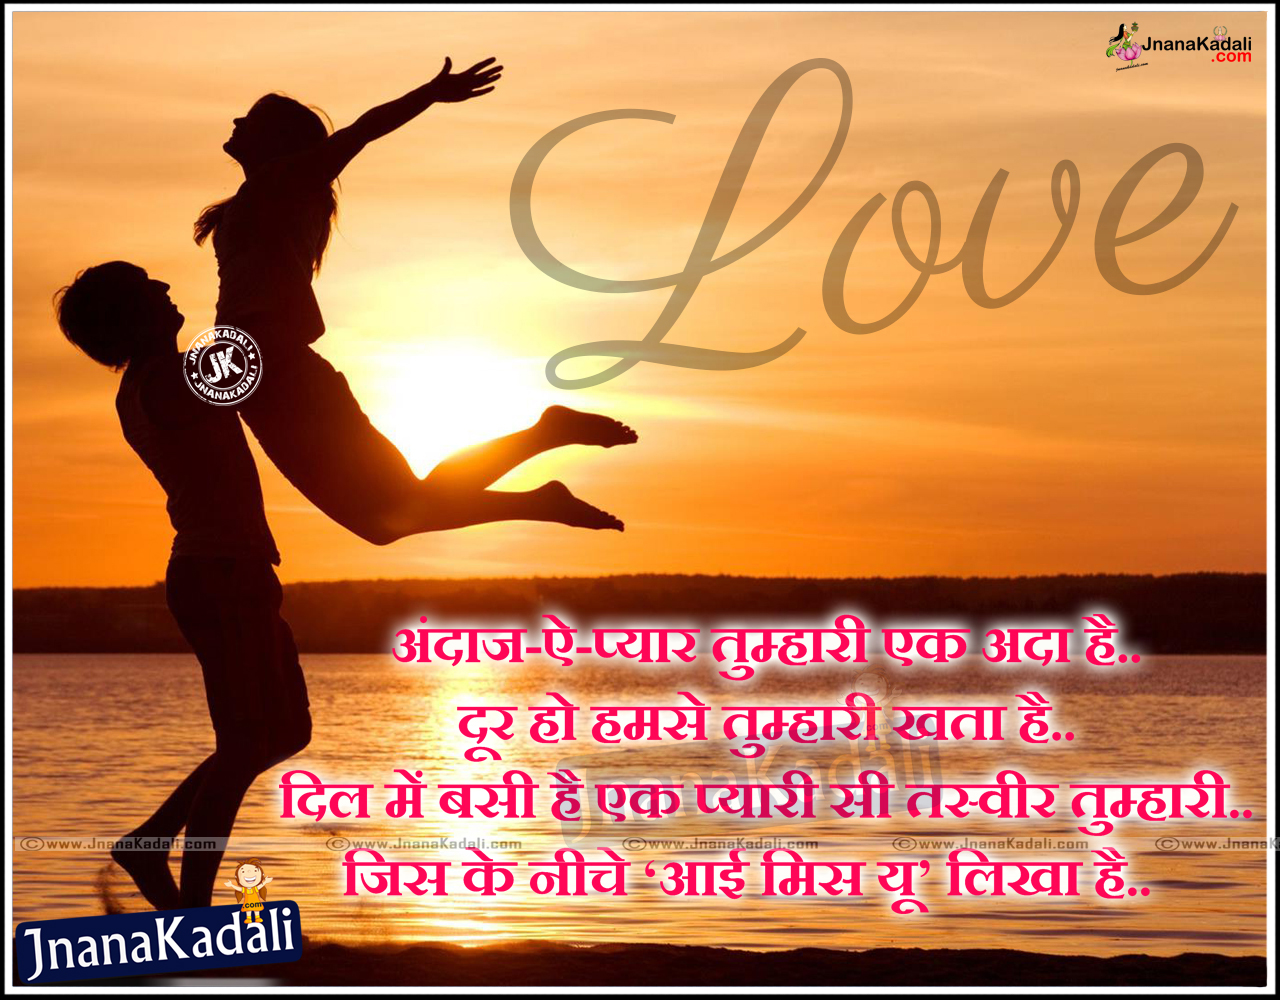 Love Images With Quotes And Sayings In Hindi - Just Call Me